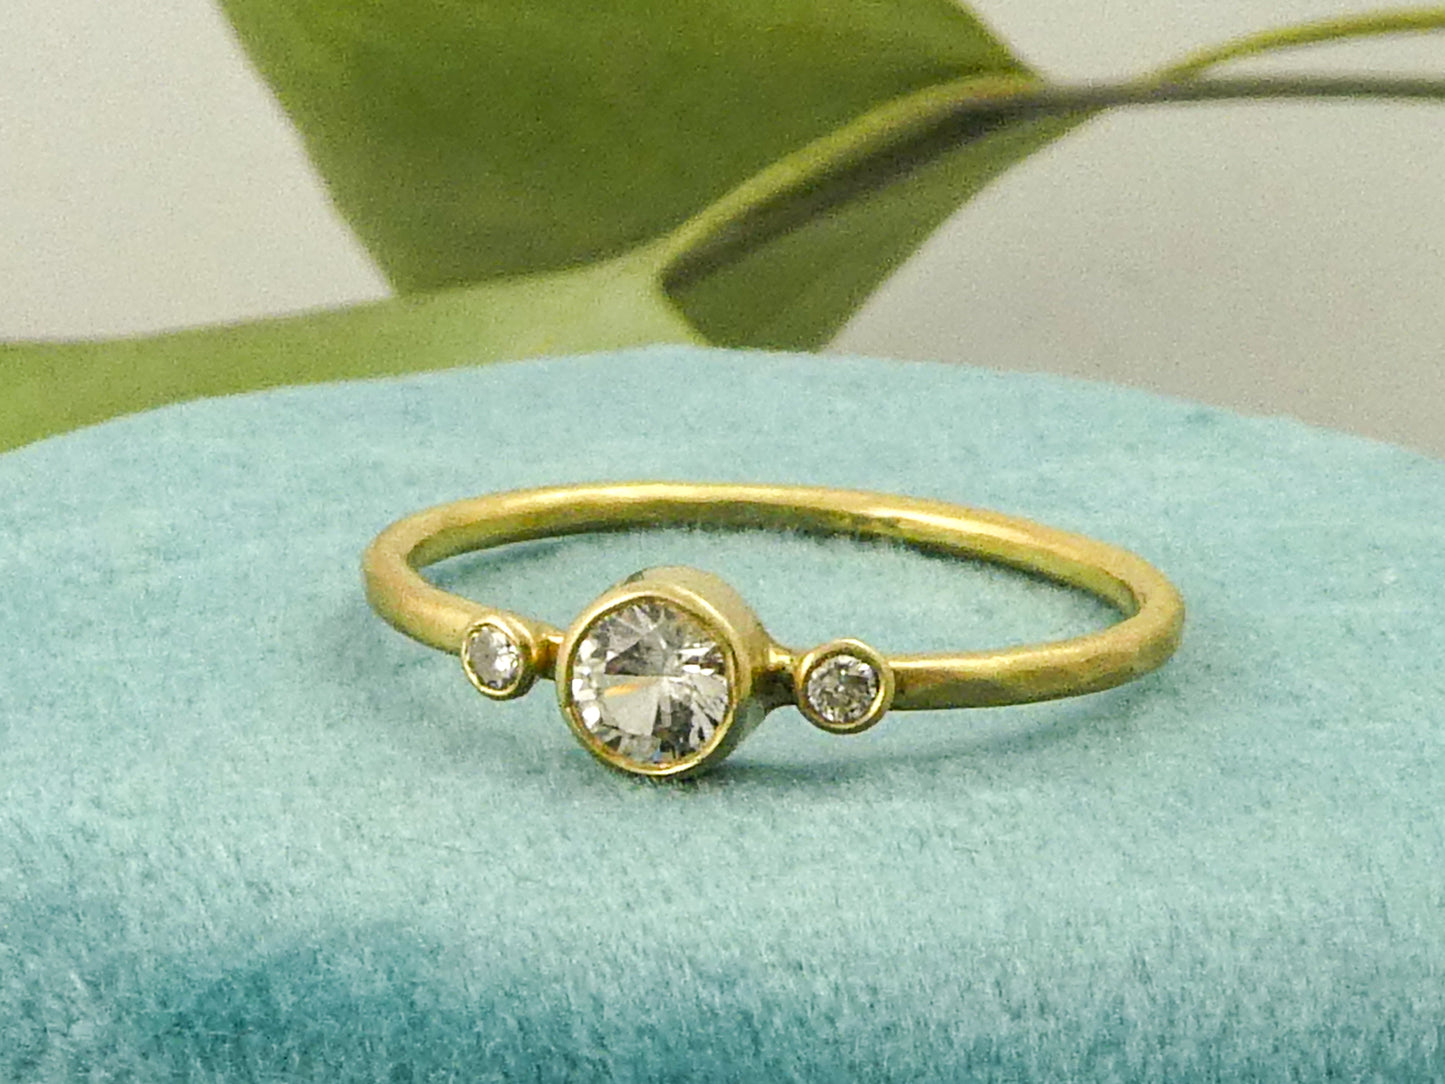 Three-Stone White Sapphire and Diamond Ring in 14k Gold | Made to order in yellow, rose or white gold